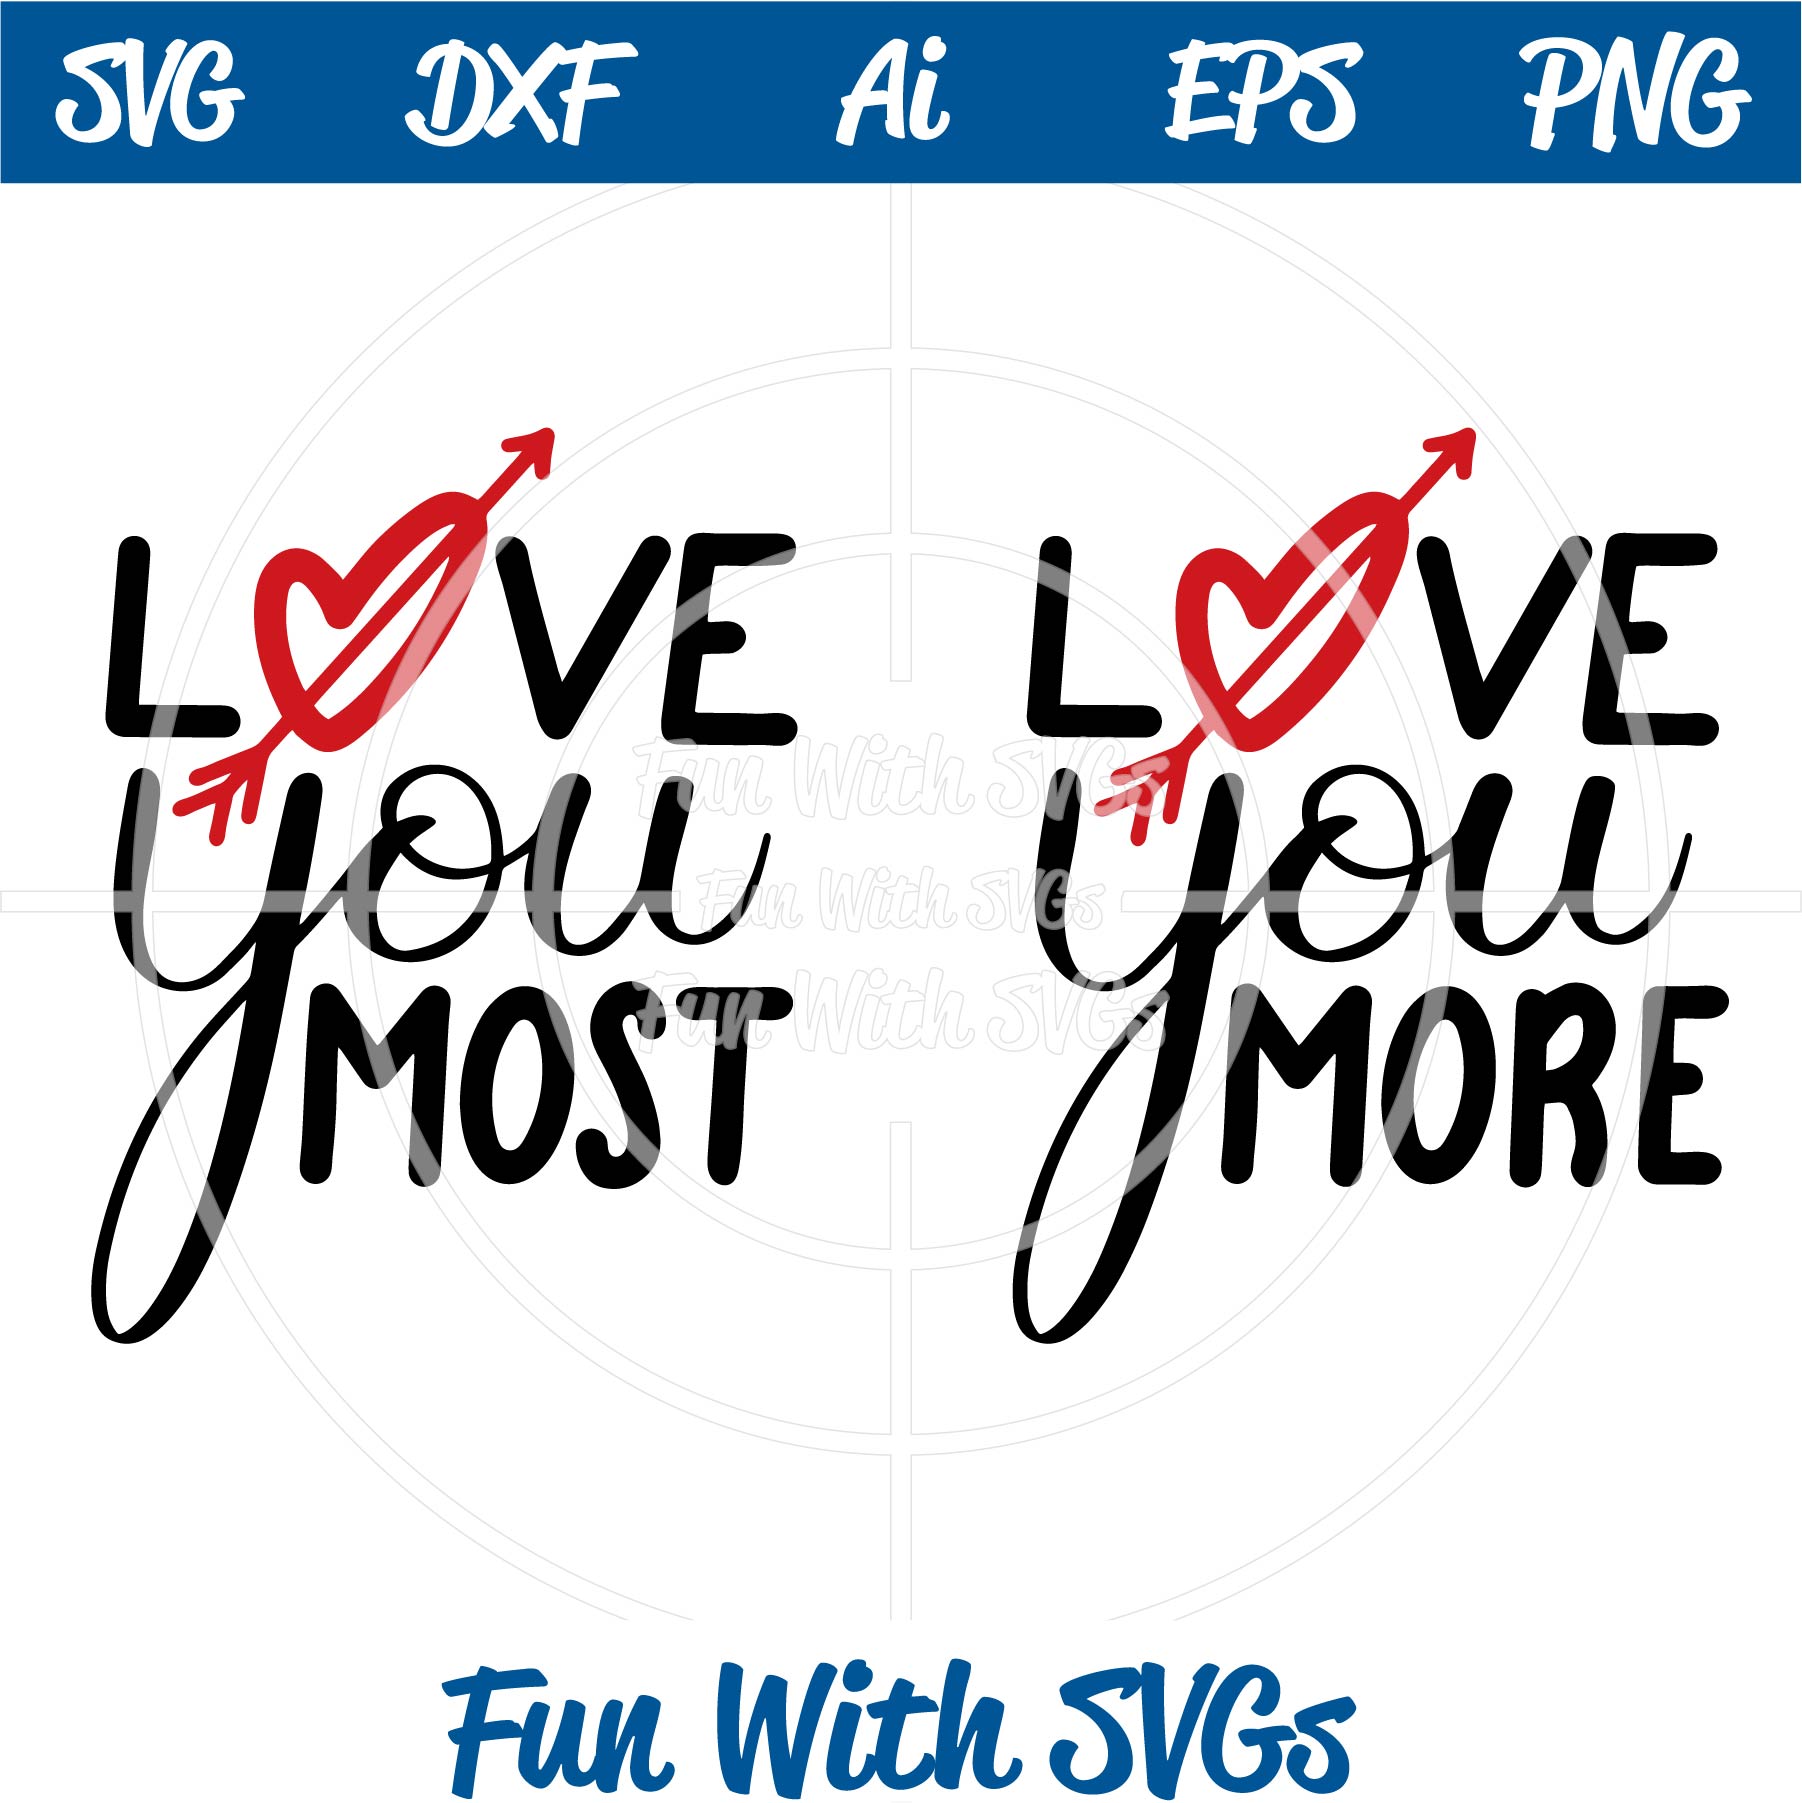 Download Love You More, Love You Most SVG Cut Files ~ Fun With SVGs